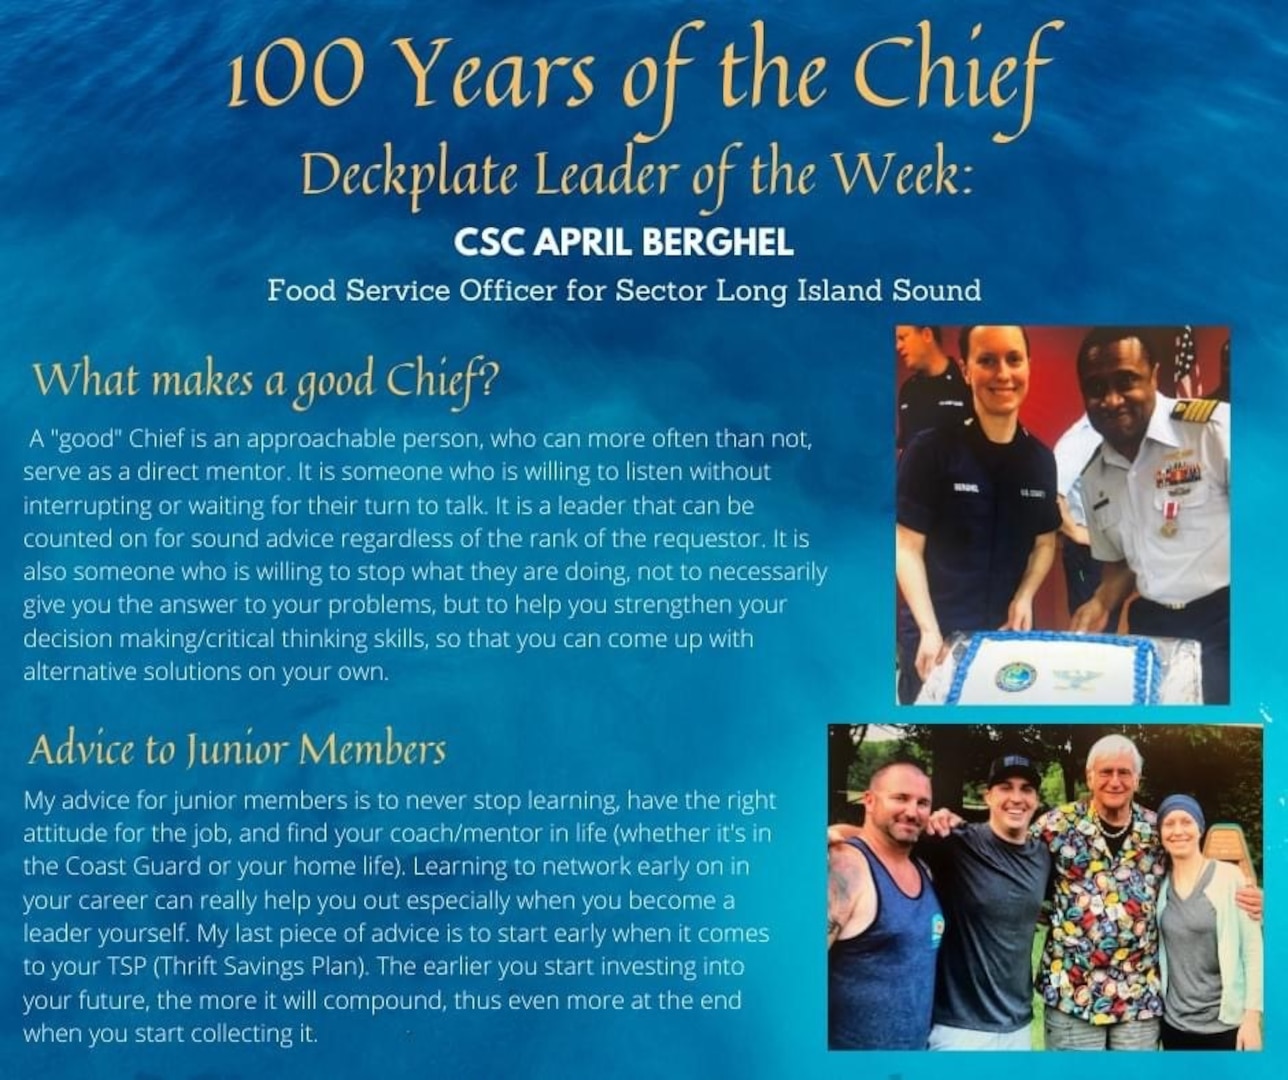 Our Deckplate Leader of the Week is Chief Petty Officer April Berghel, a culinary specialist currently serving as the Food Service Officer at U.S. Coast Guard Sector Long Island Sound.